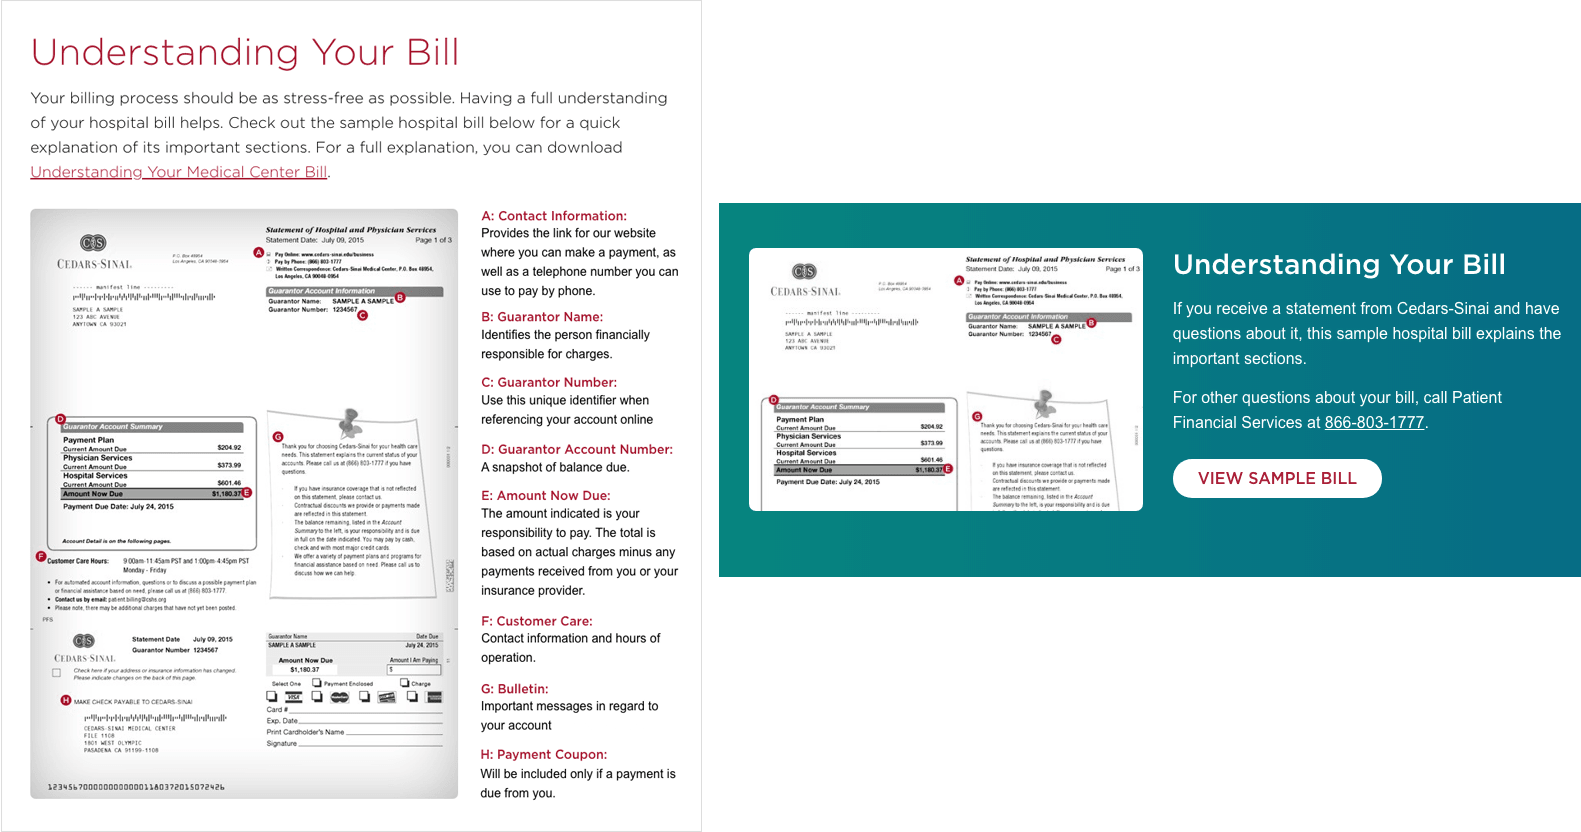 Cedars Sinai uses a sample bill as an infographic to help patients interpret the charges for their medical care